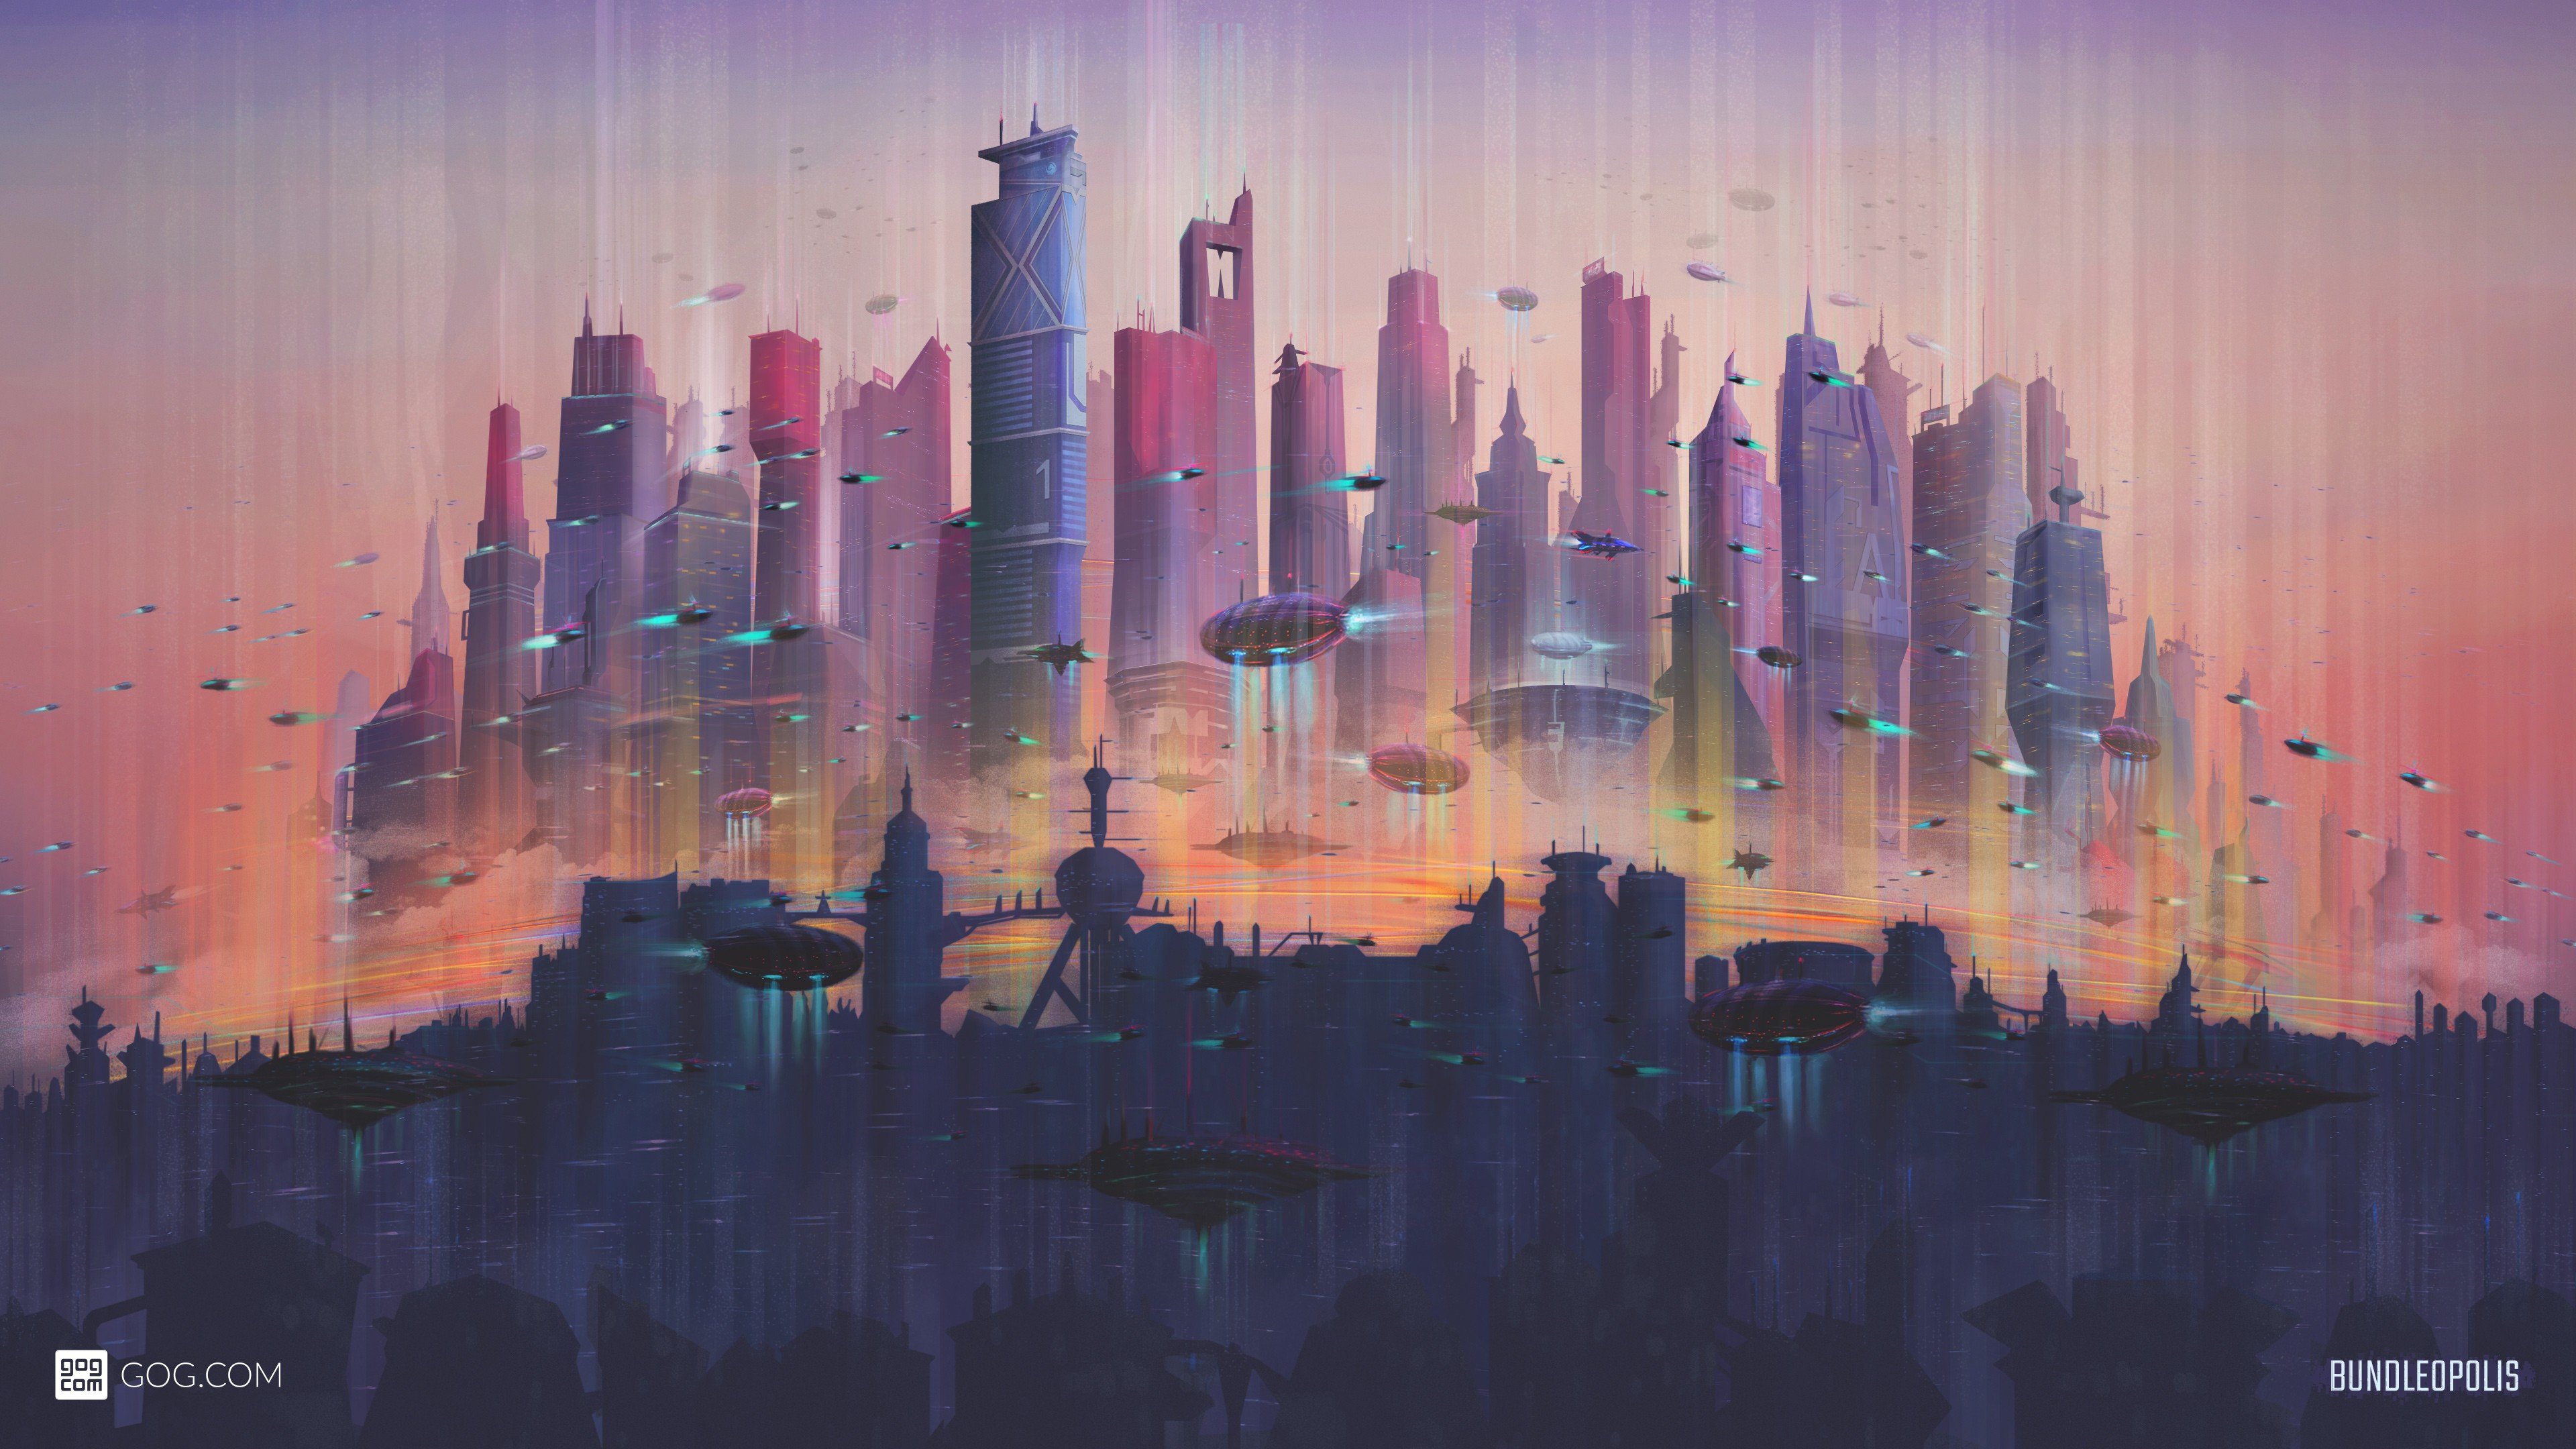 GOG.com, Futuristic, Cityscape Wallpapers HD / Desktop and Mobile Backgrounds